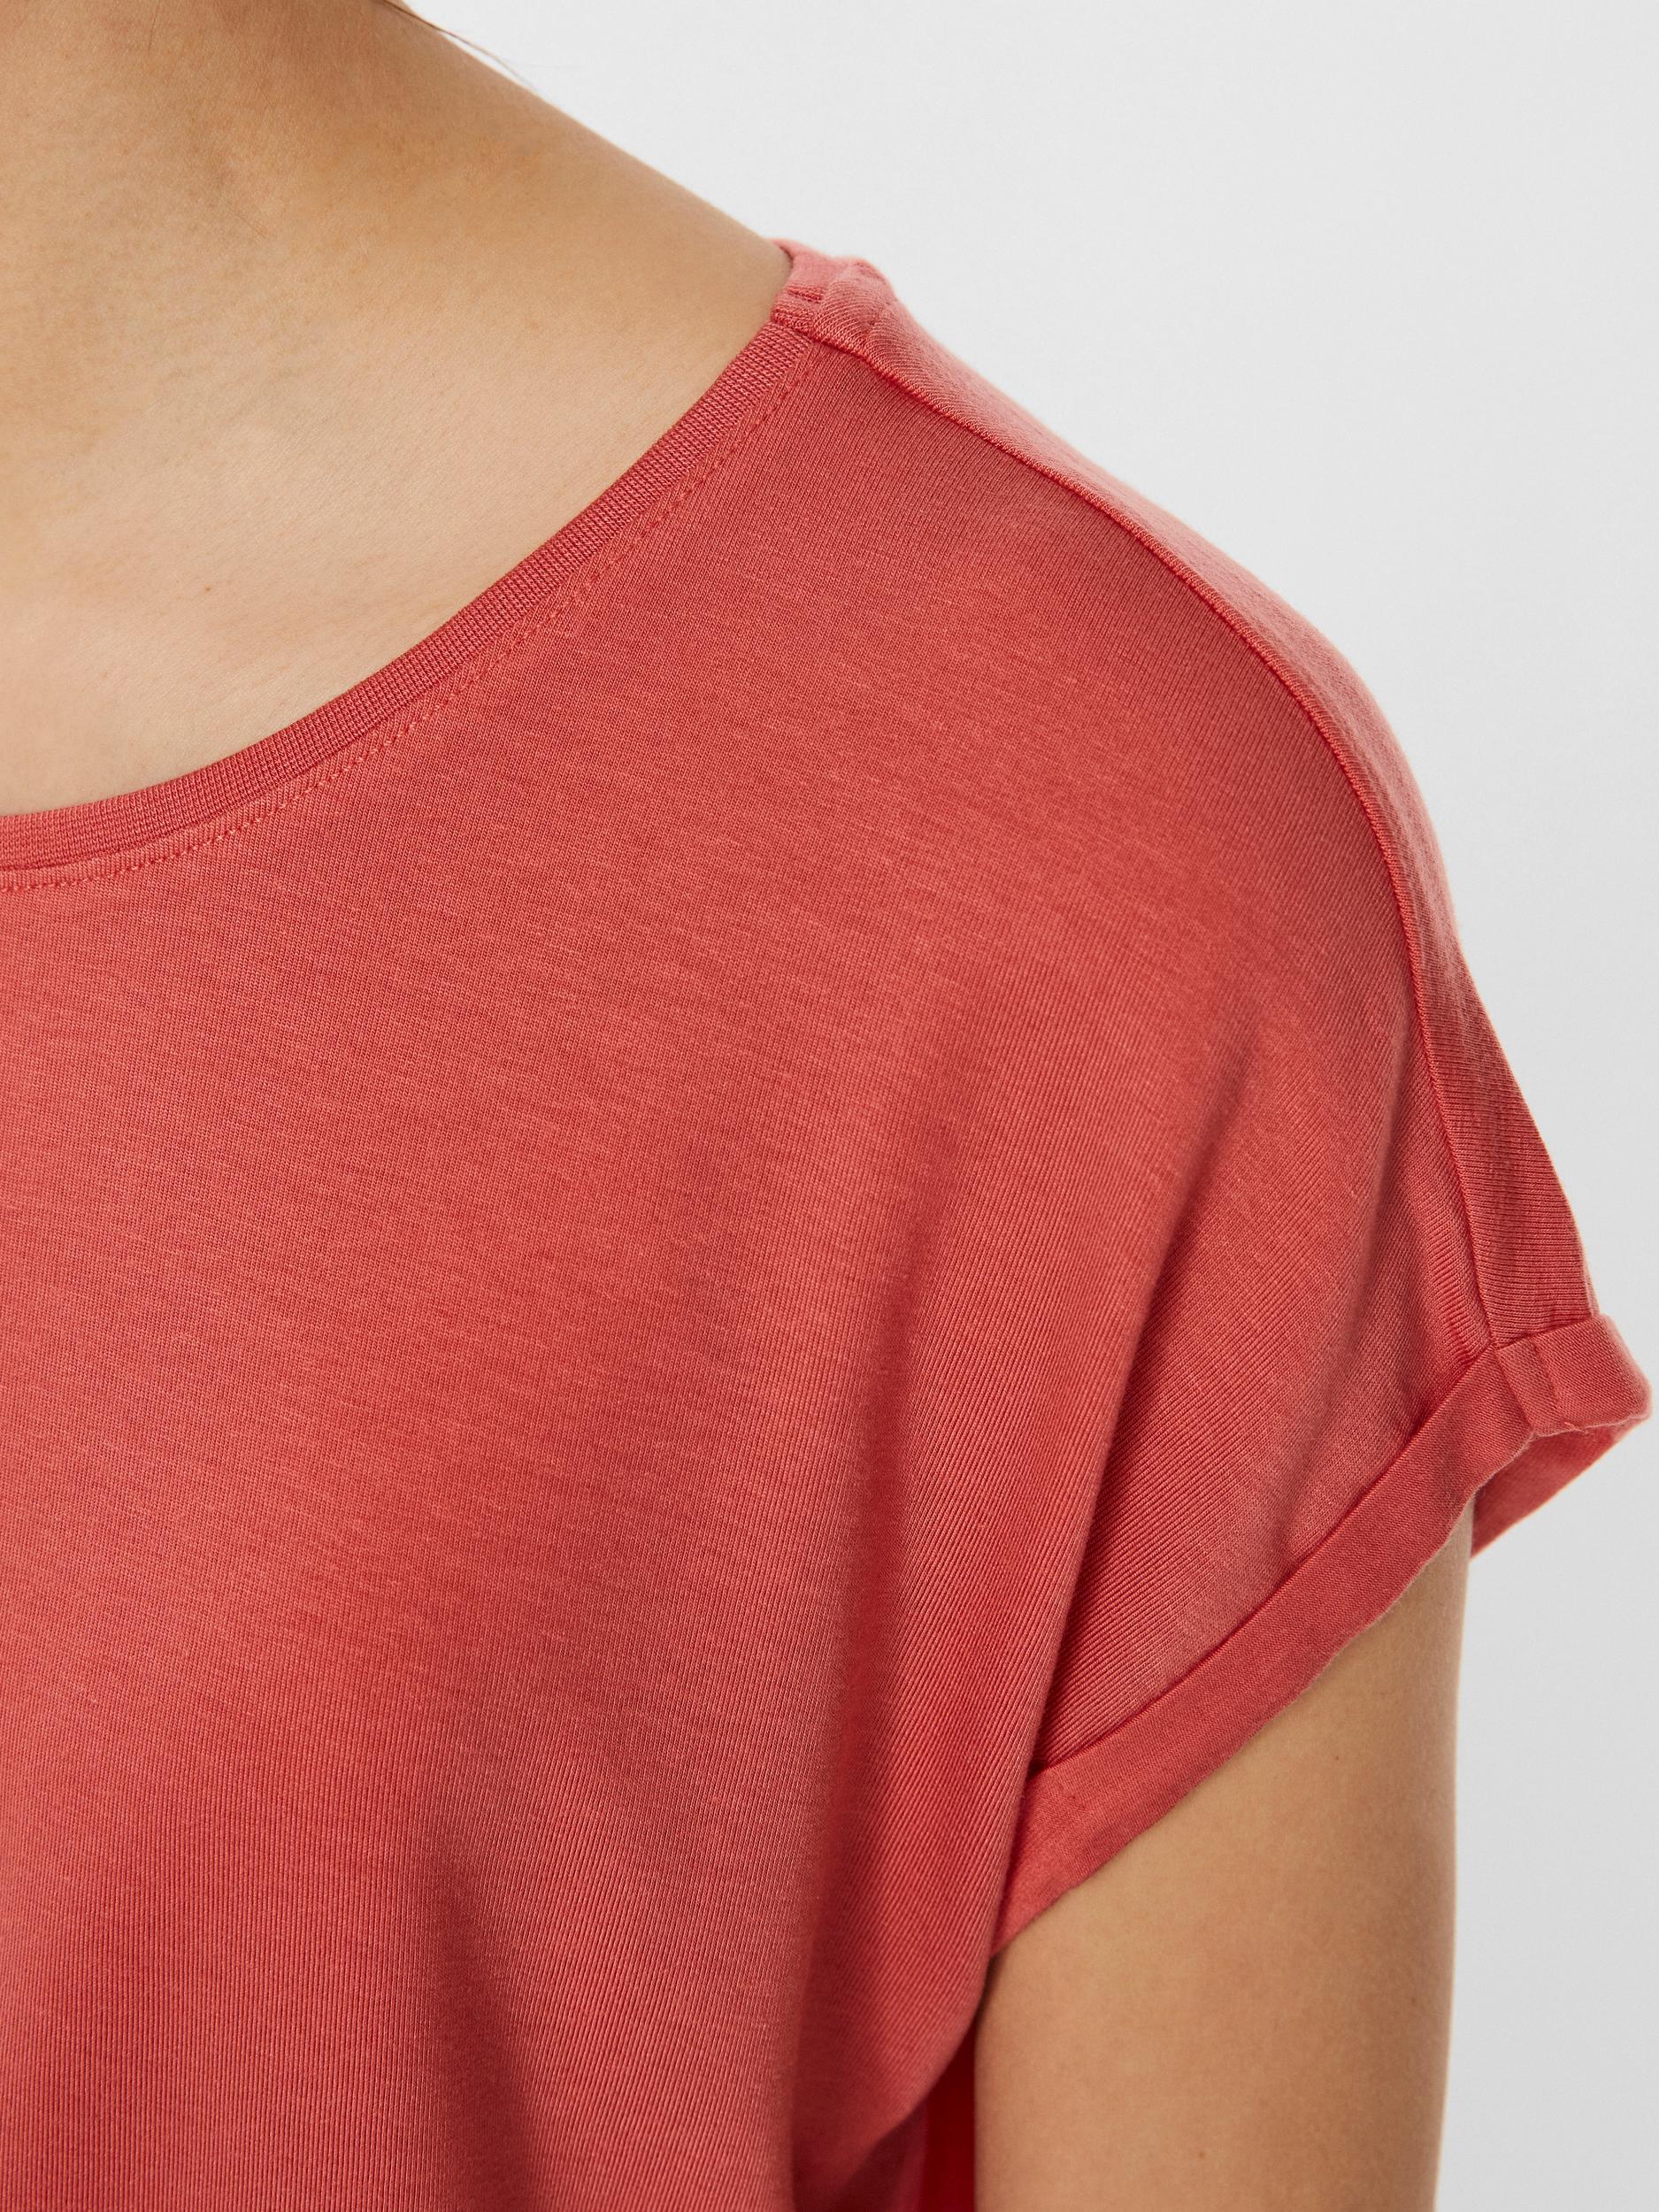 FINAL SALE- AWARE | Ava T-Shirt, SPICED CORAL, large